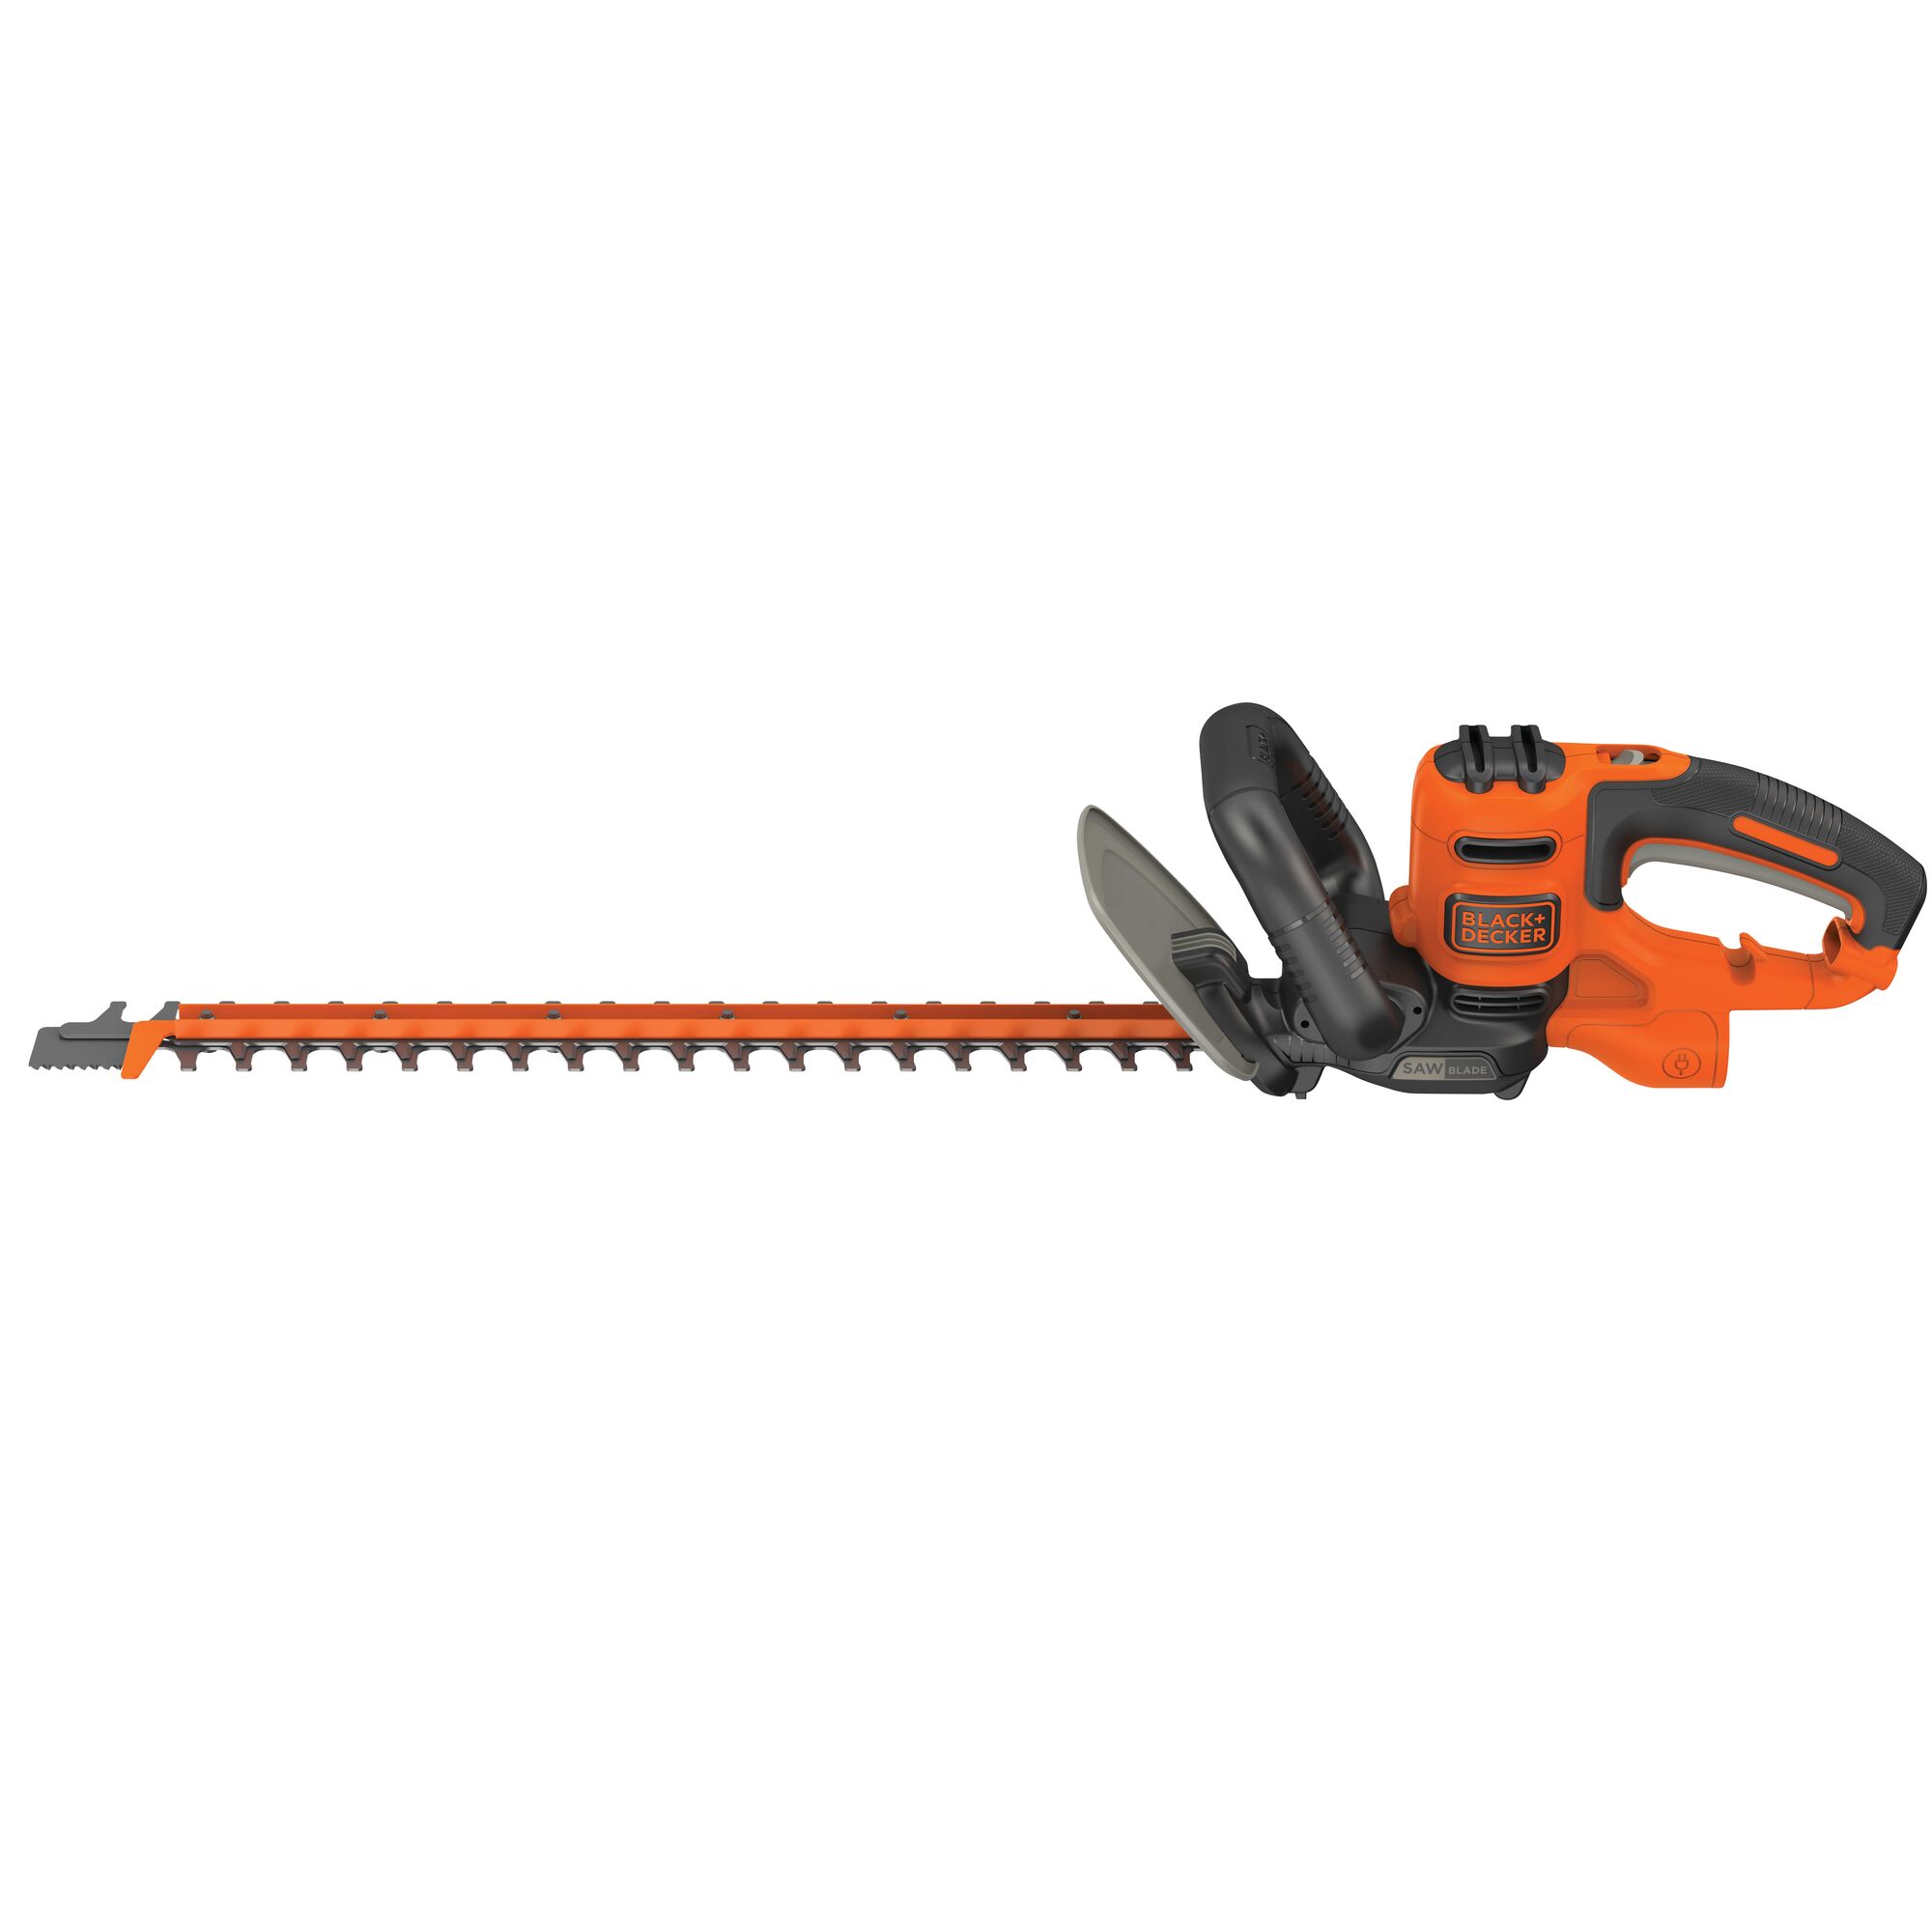 Profile of 22 inch saw blade electric hedge trimmer.